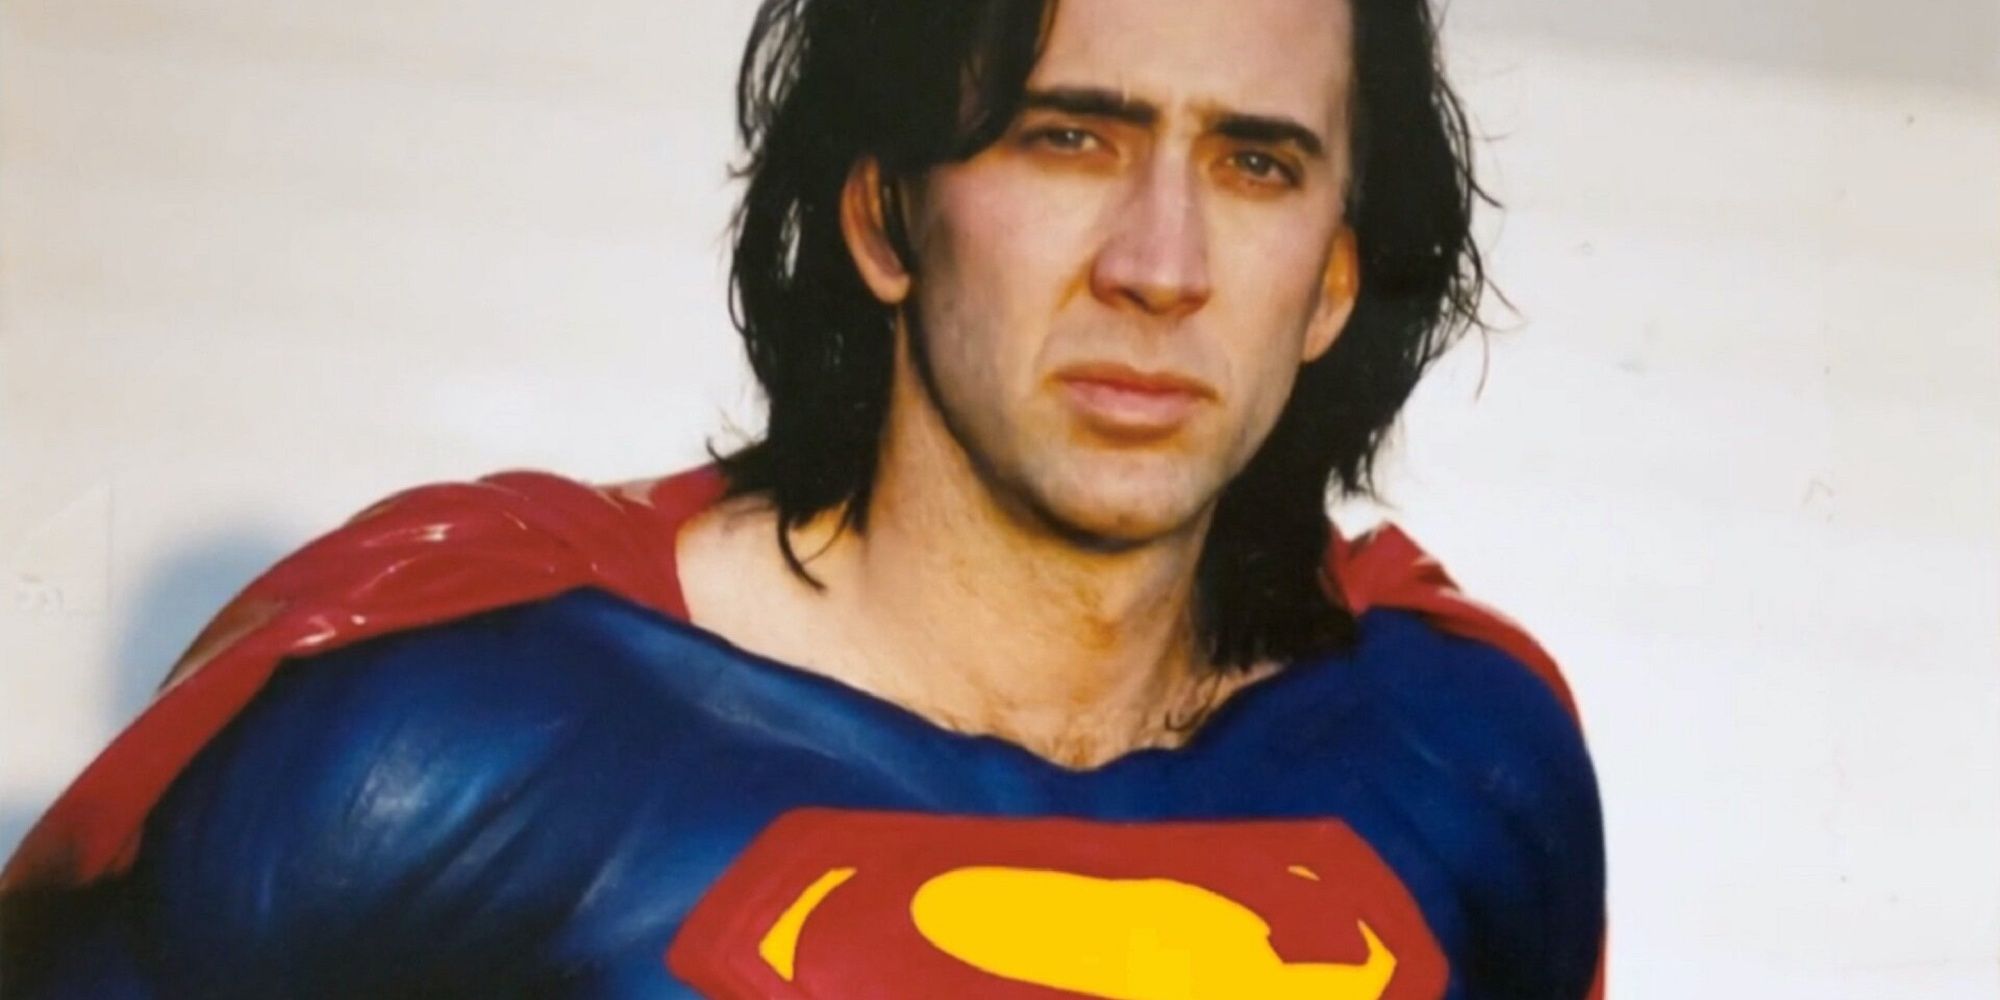 Nicolas Cage in the Superman suit while testing for Superman Lives.